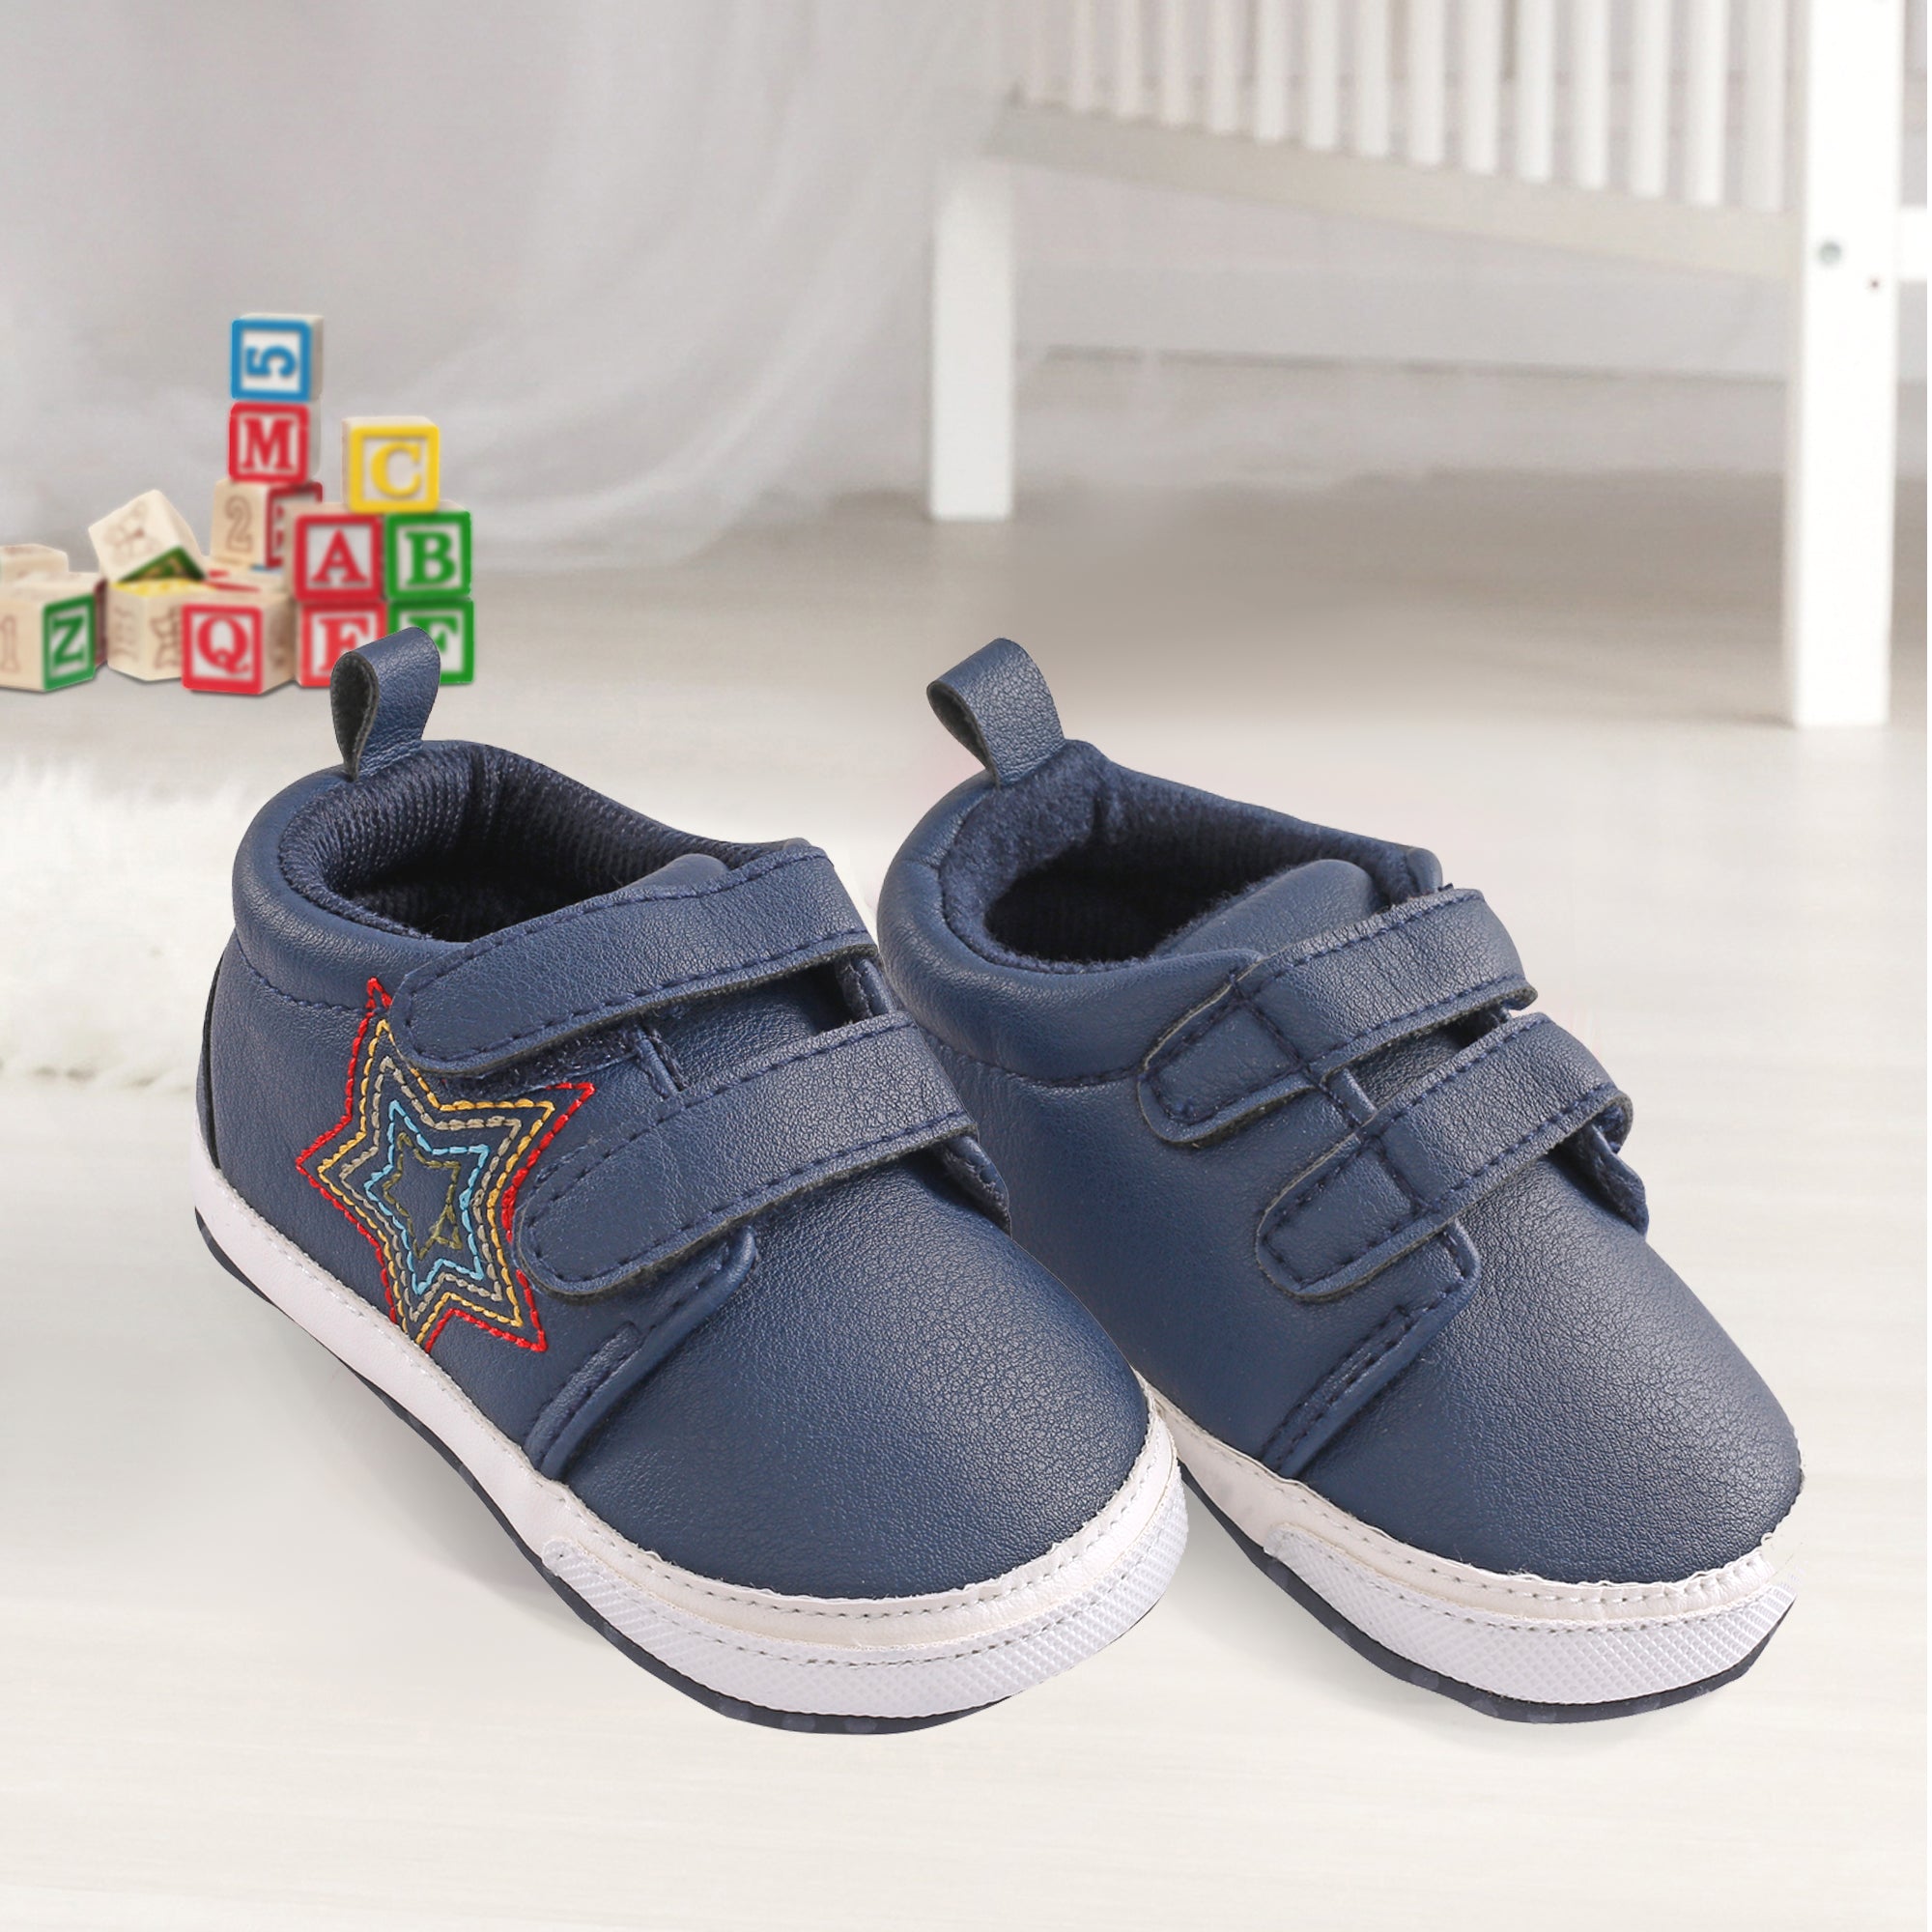 My Star Blue Casual Booties - Baby Moo